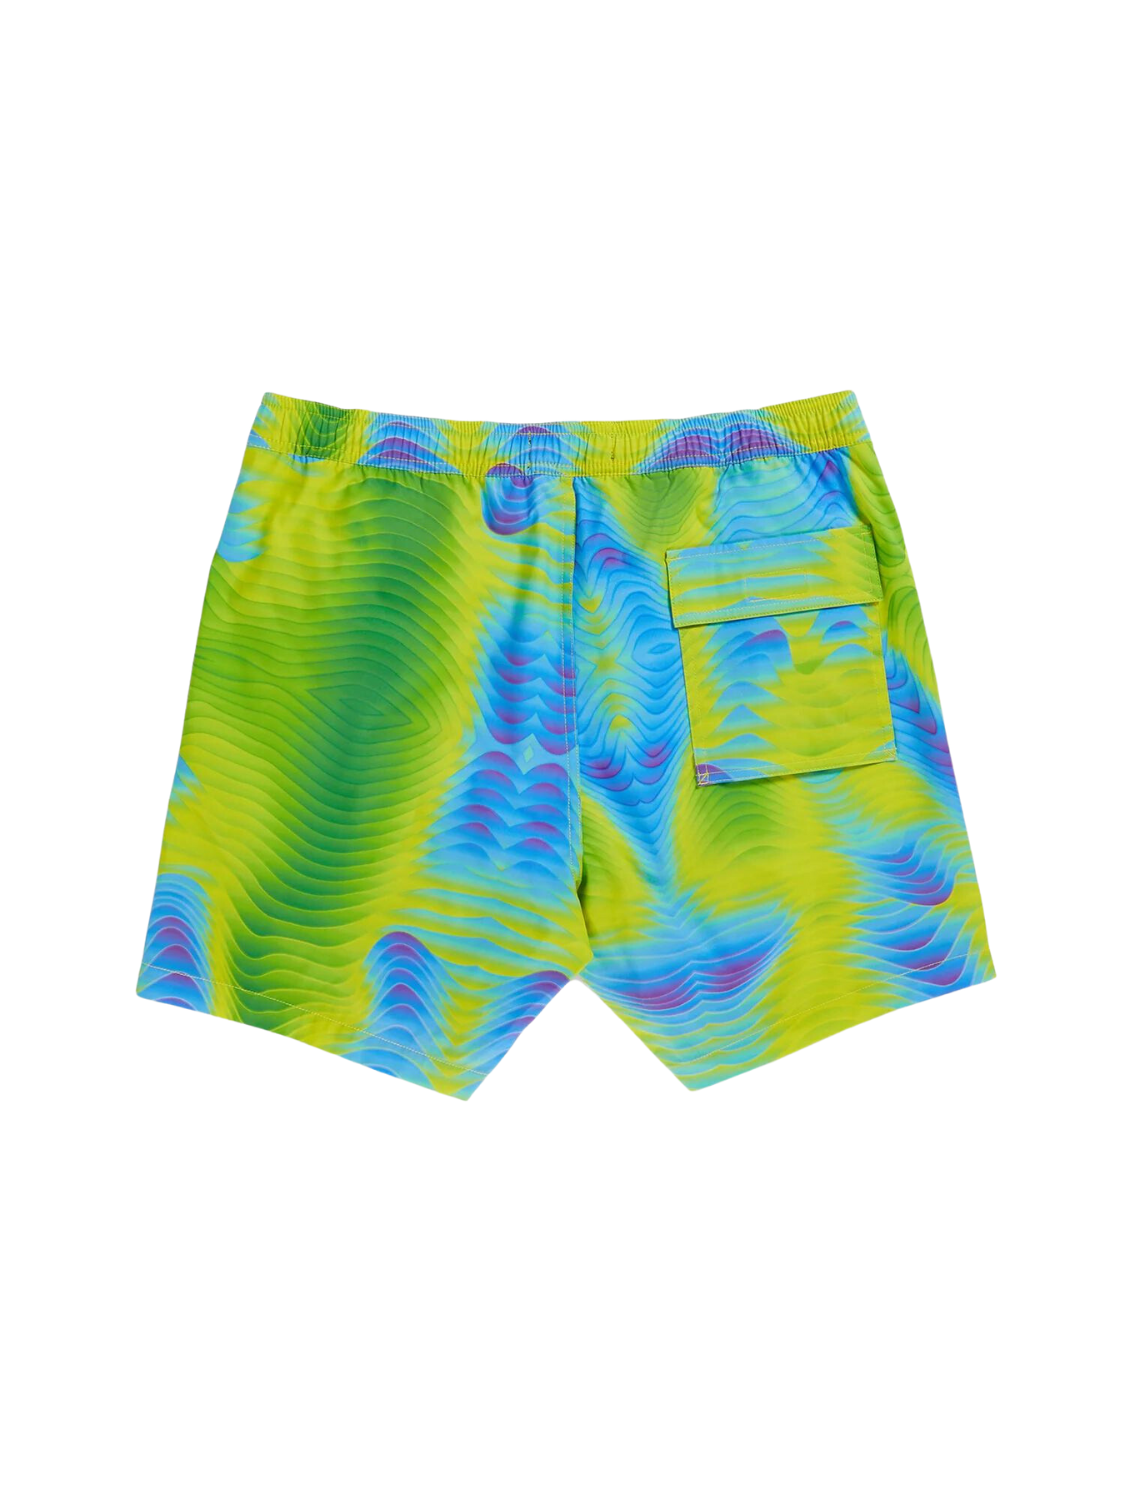 men's Montgomery swim trunk turns swimwear on its head with a dizzying all-over pattern